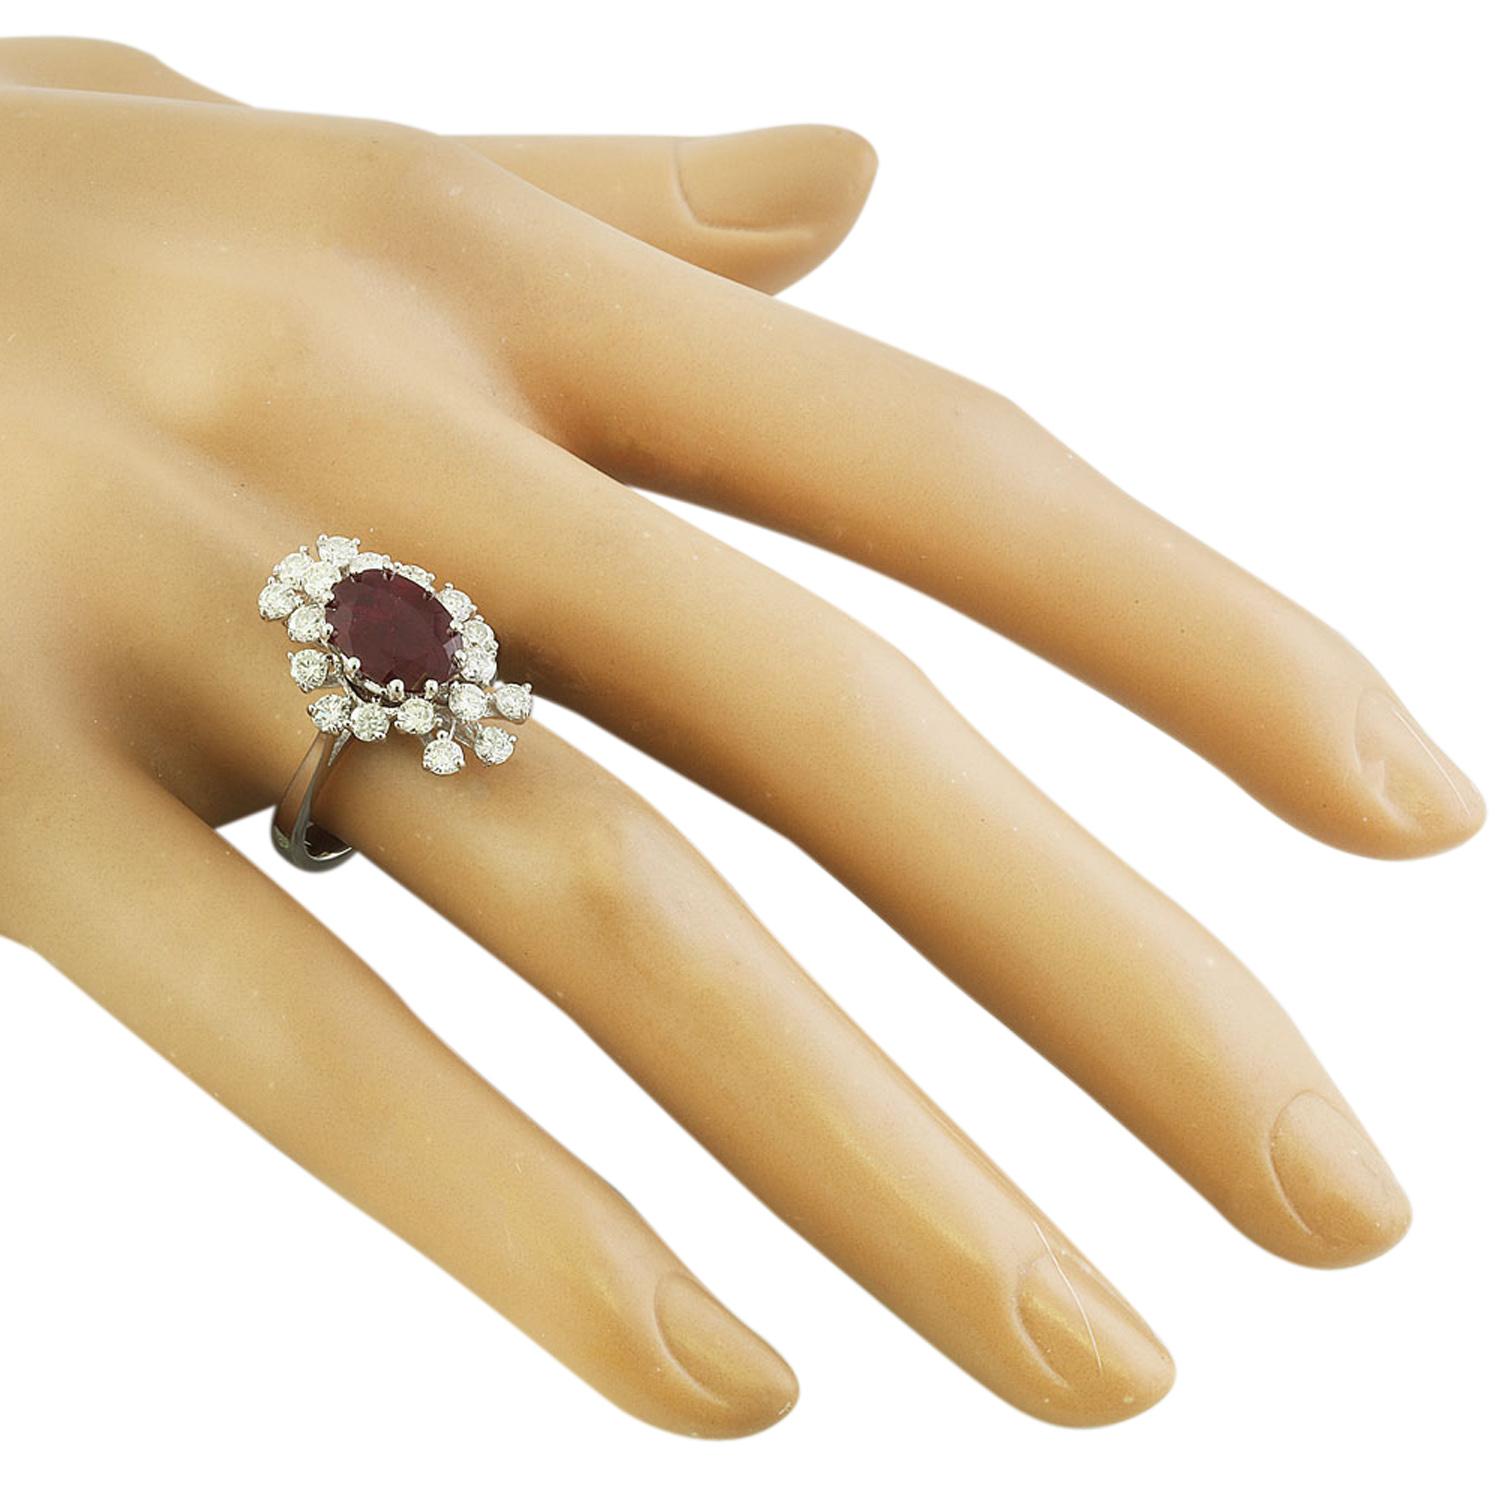 Exquisite Natural Ruby Diamond Ring In 14 Karat Solid White Gold  In New Condition For Sale In Los Angeles, CA